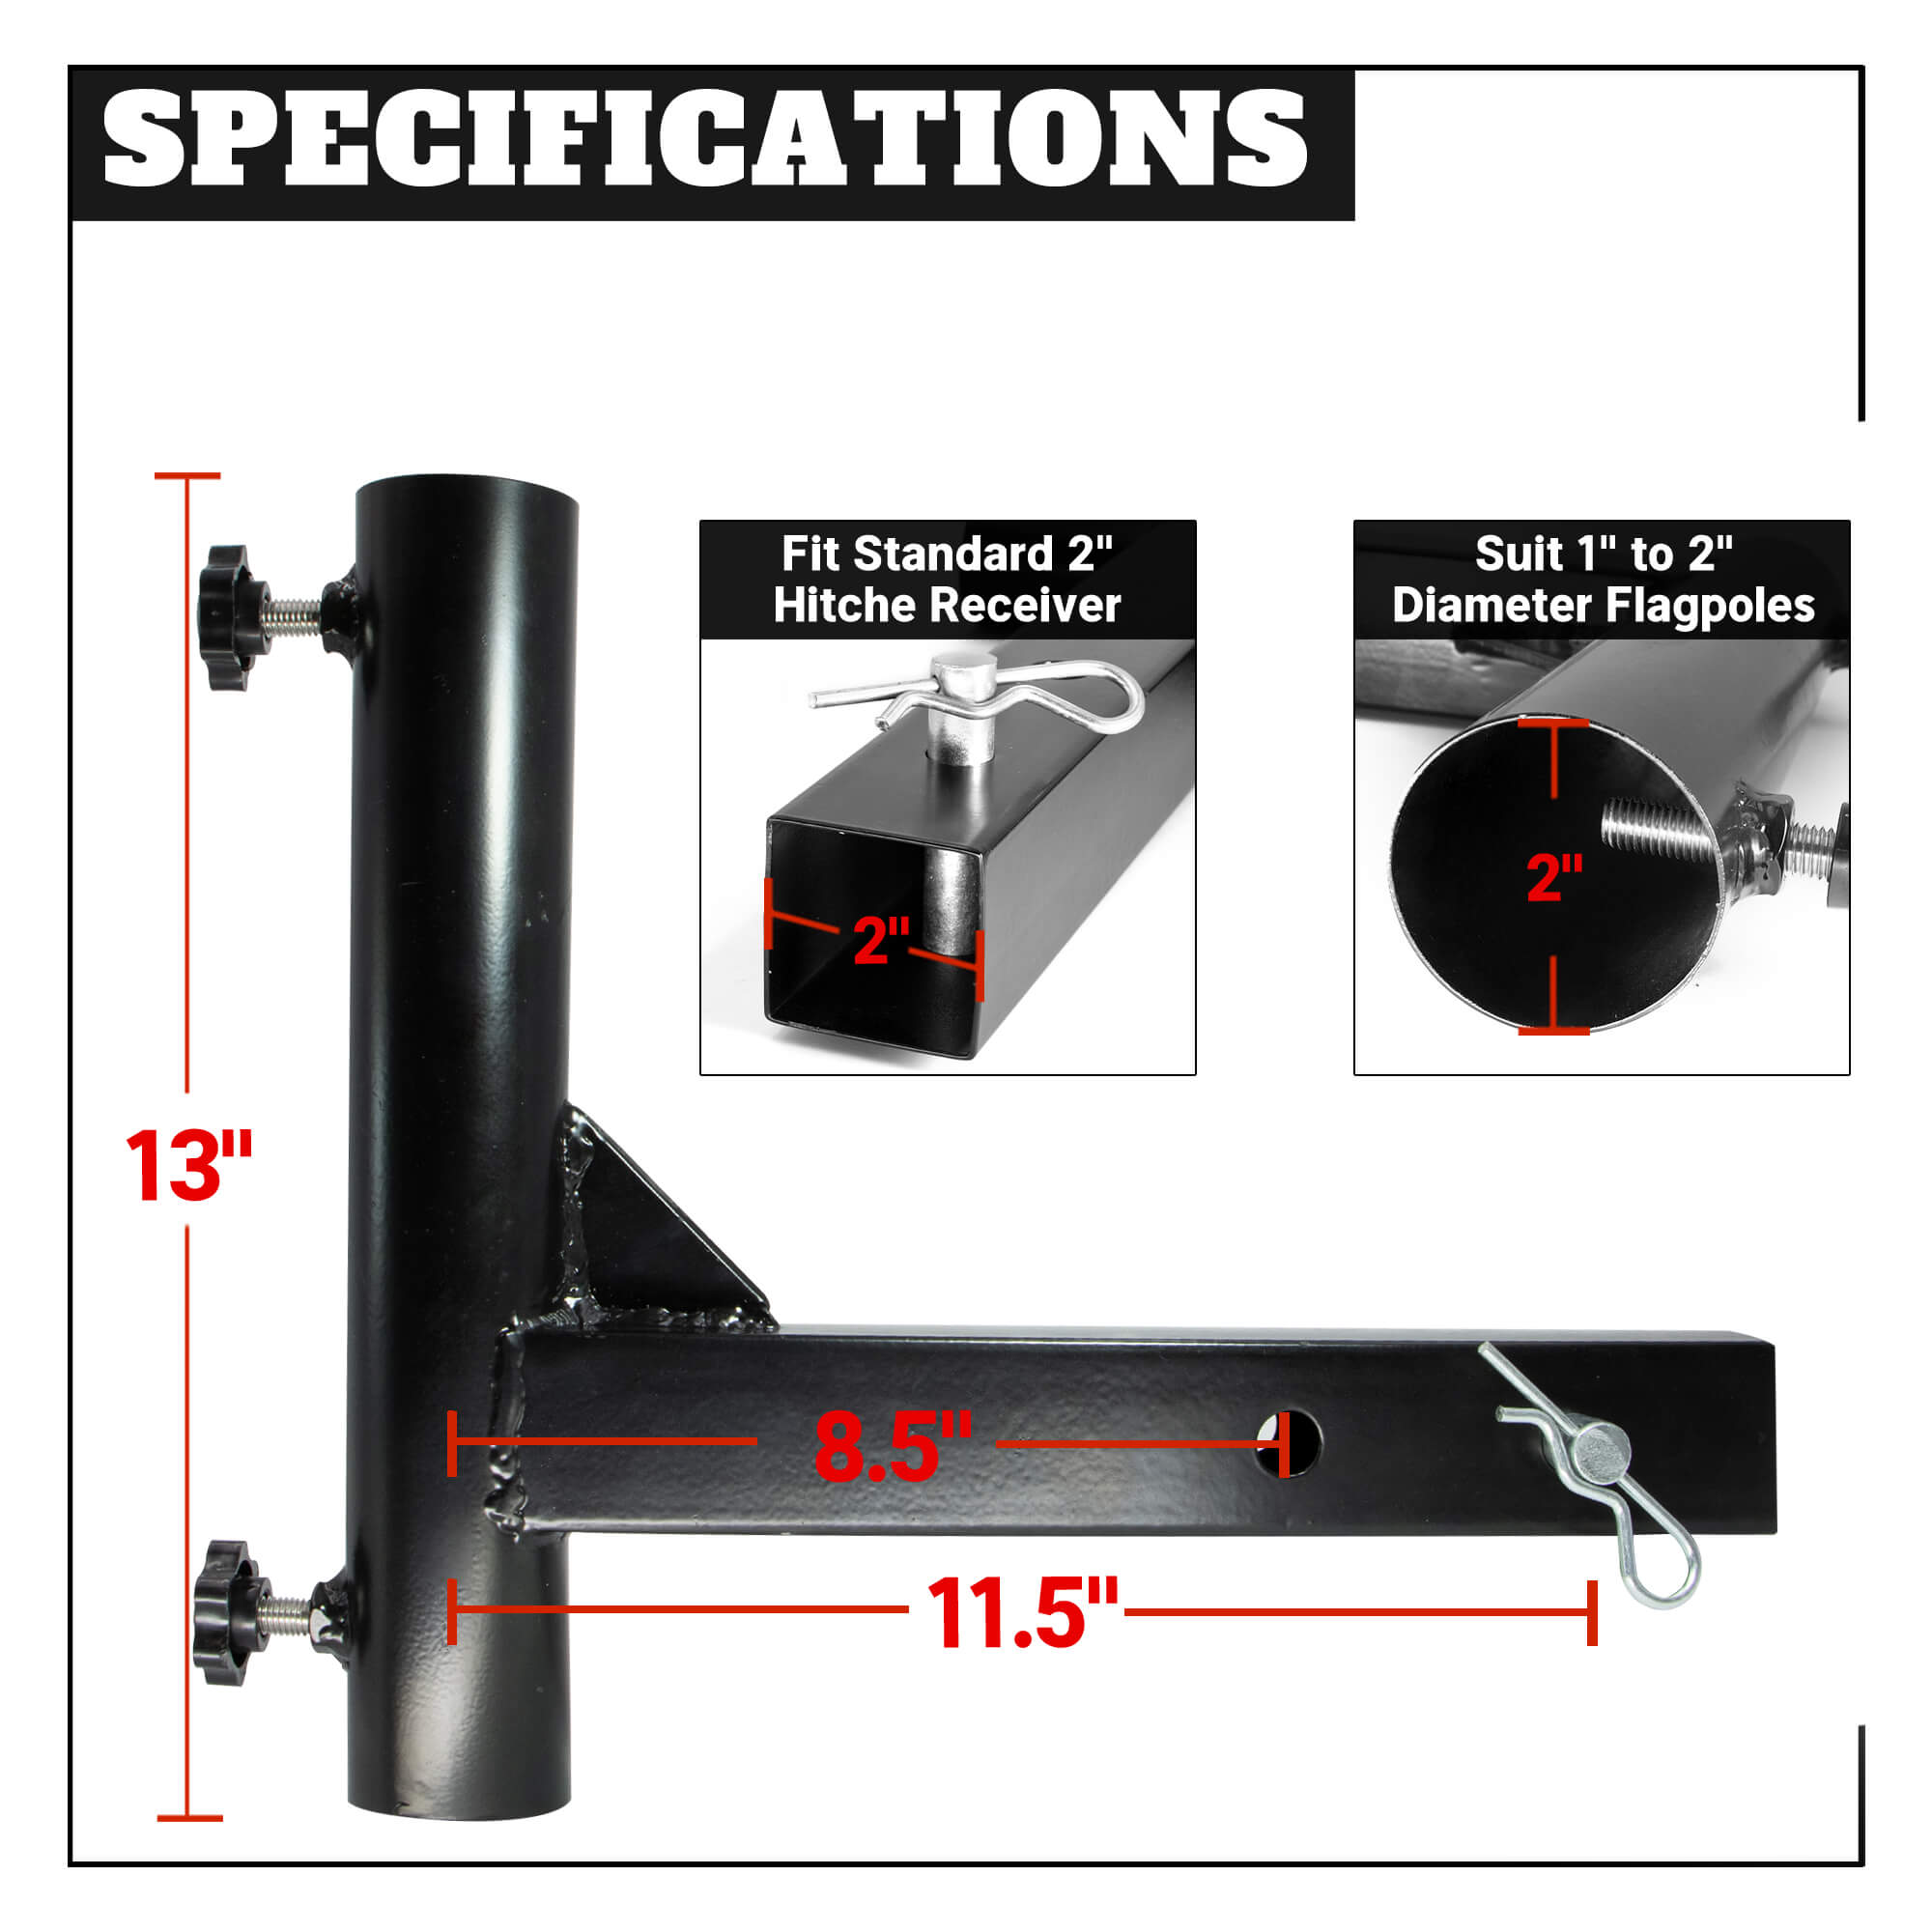 Truck,Car,SUV etc Danti sevencow Universal Single Mount Mini Flag Pole and Bracket Holder Kit Compatible for Any Vehicle with Standard 2” Hitch Receiver 